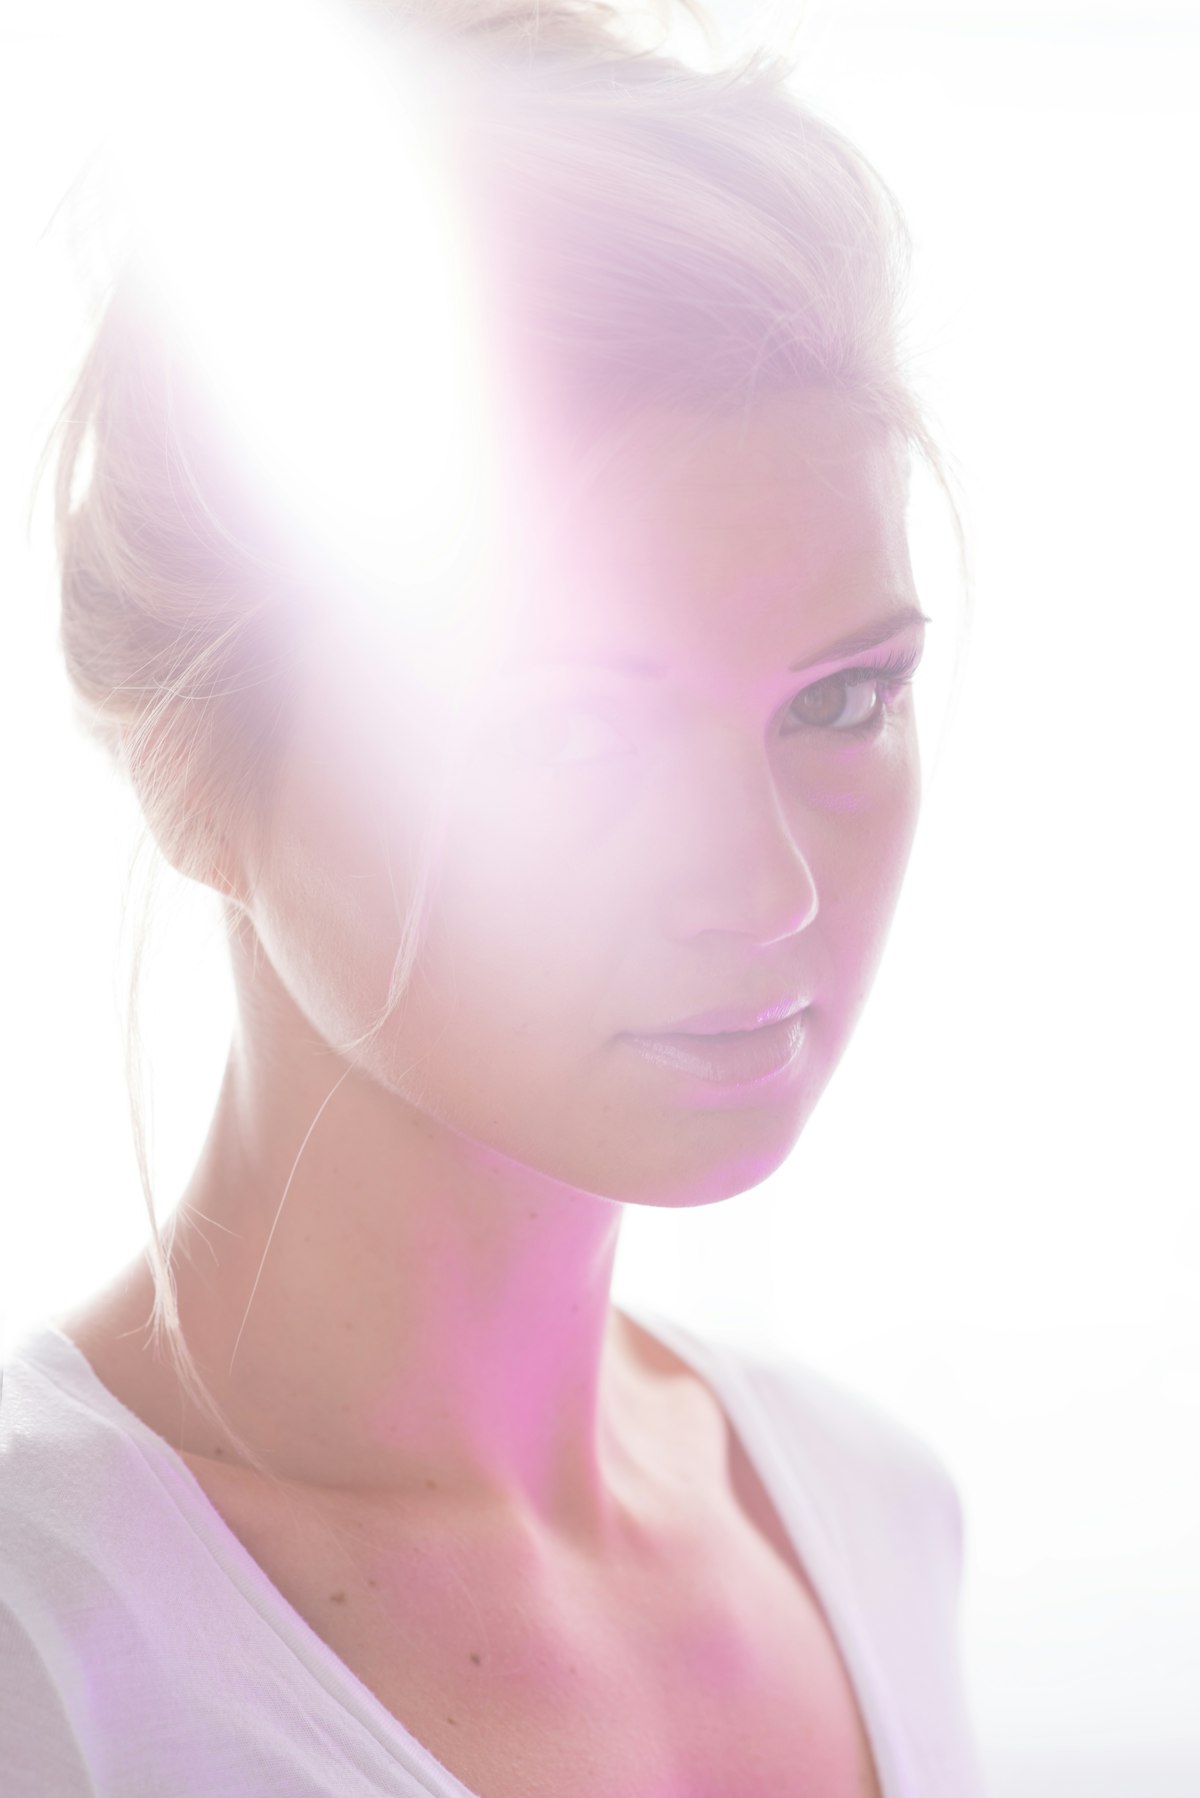 Heal Your Skin With These Best Light Therapy Wands!